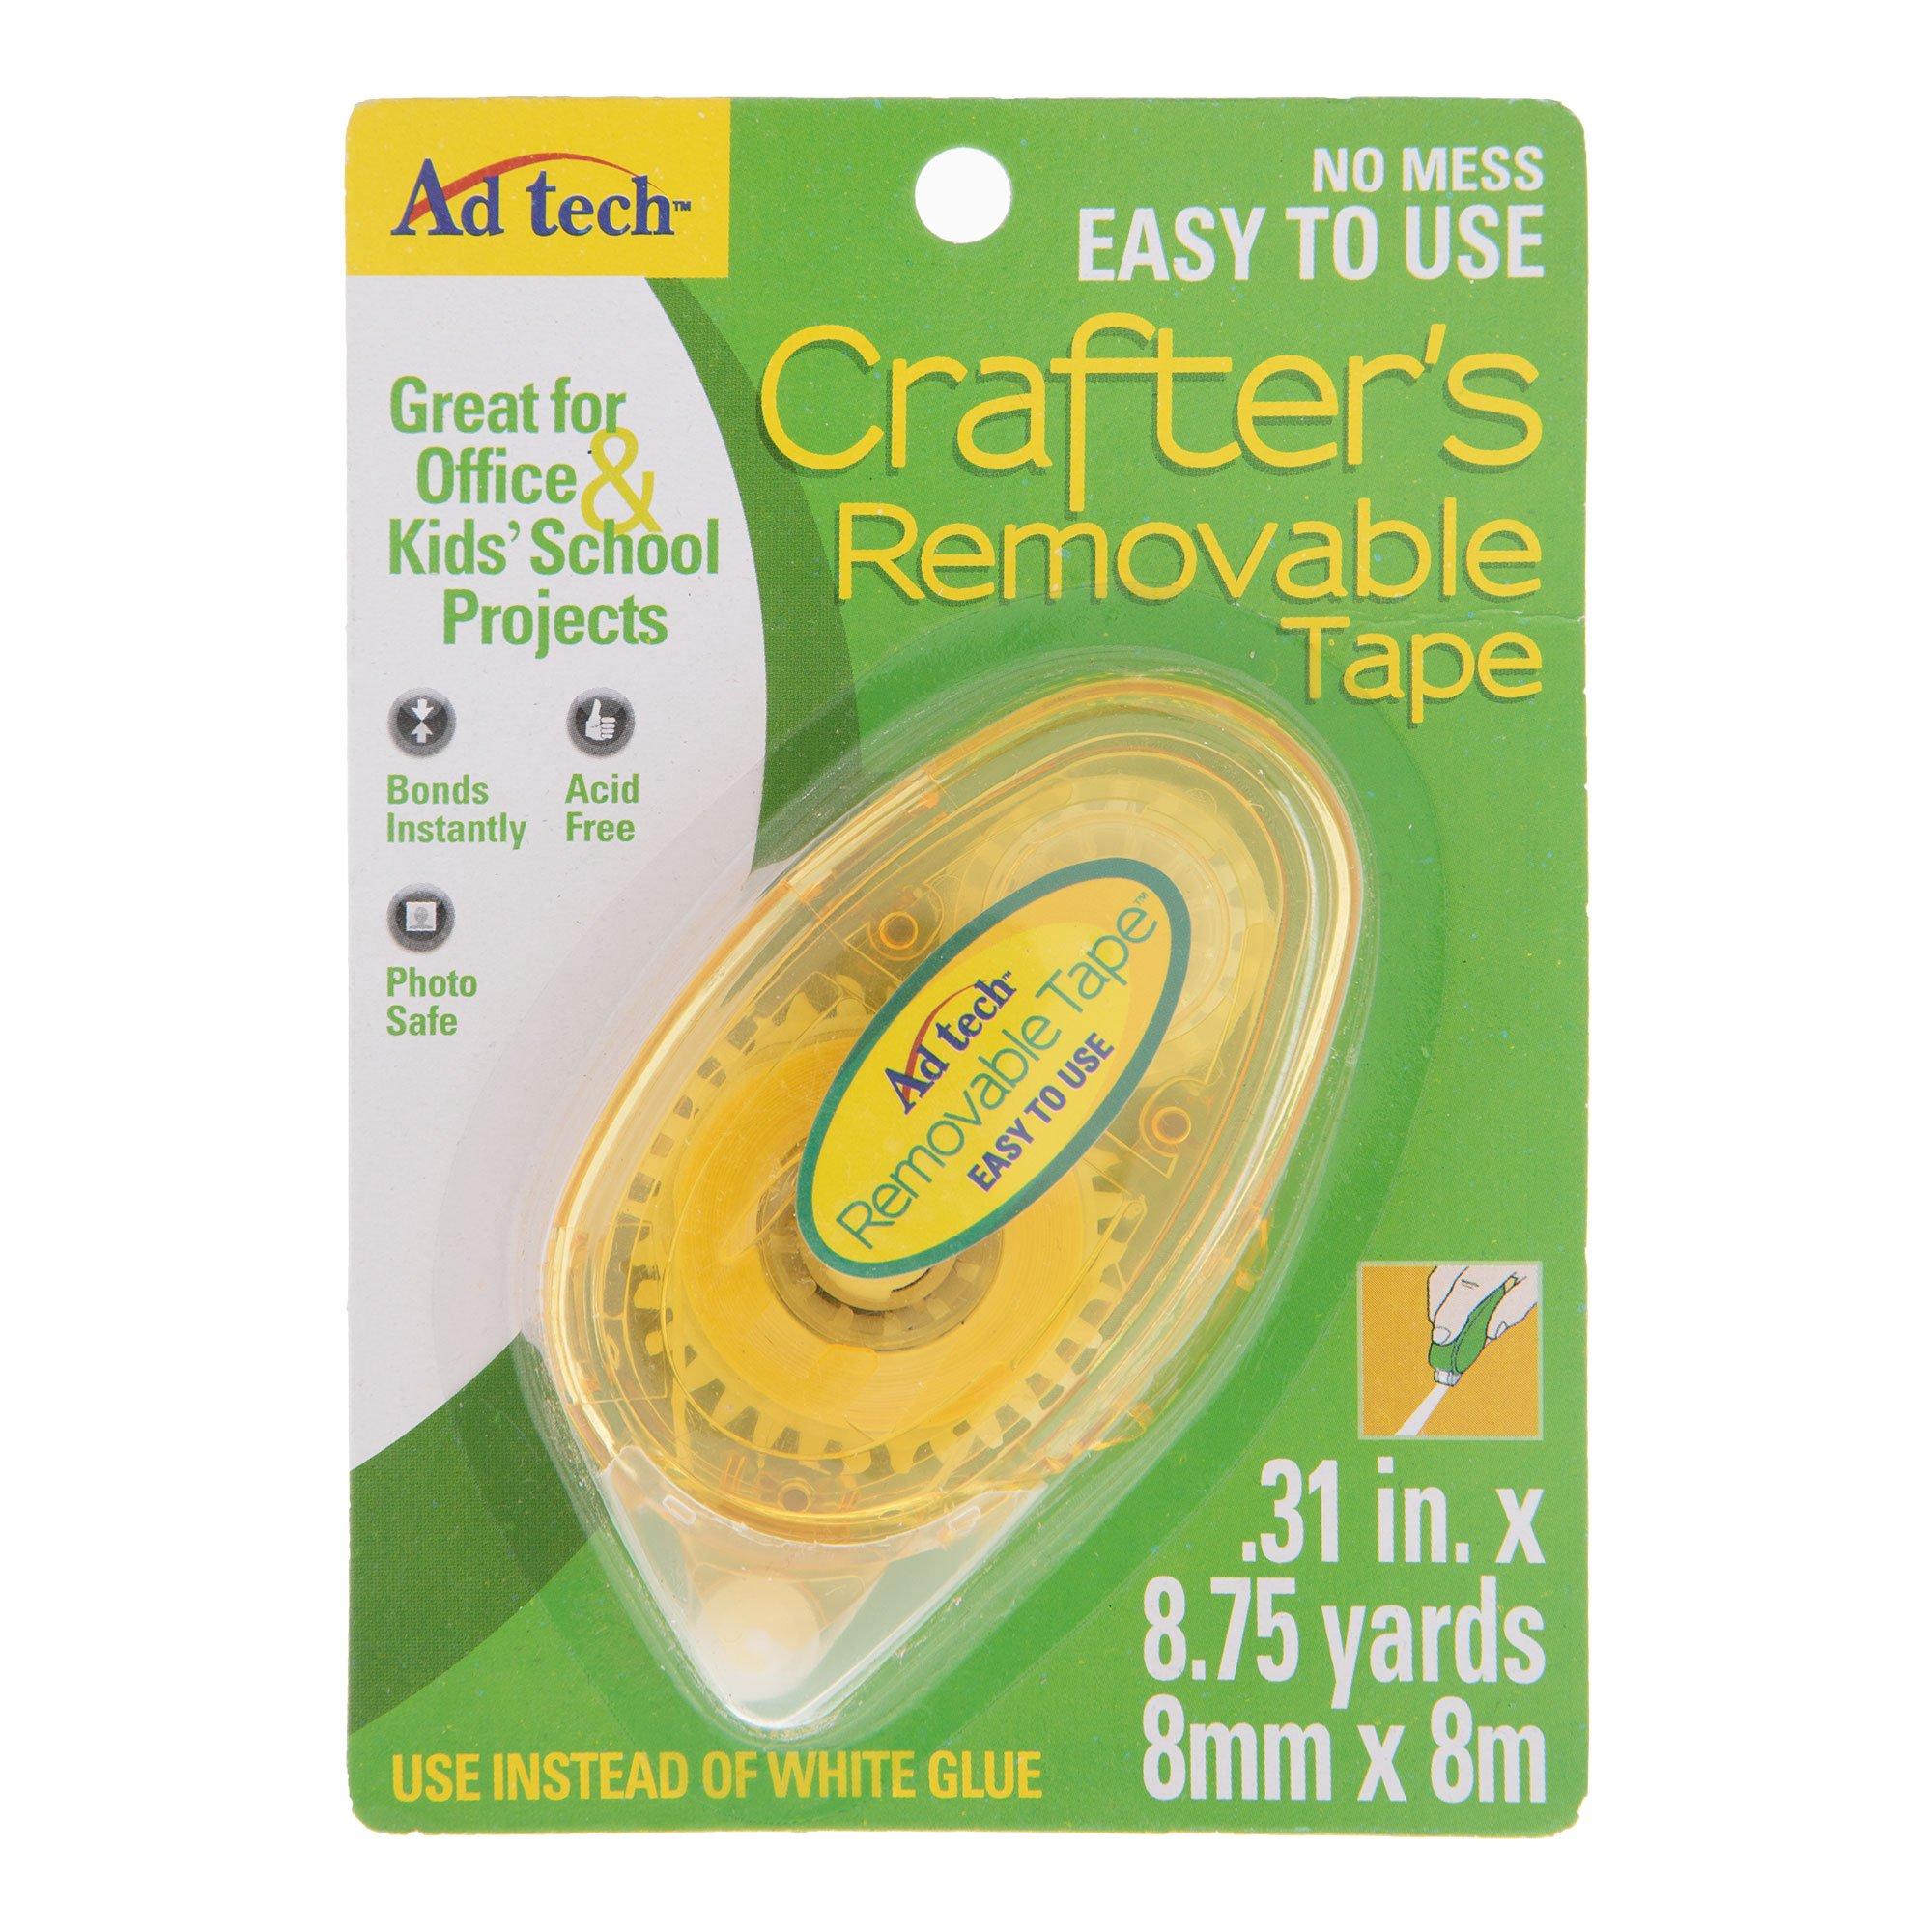 Crafter's Removable Tape